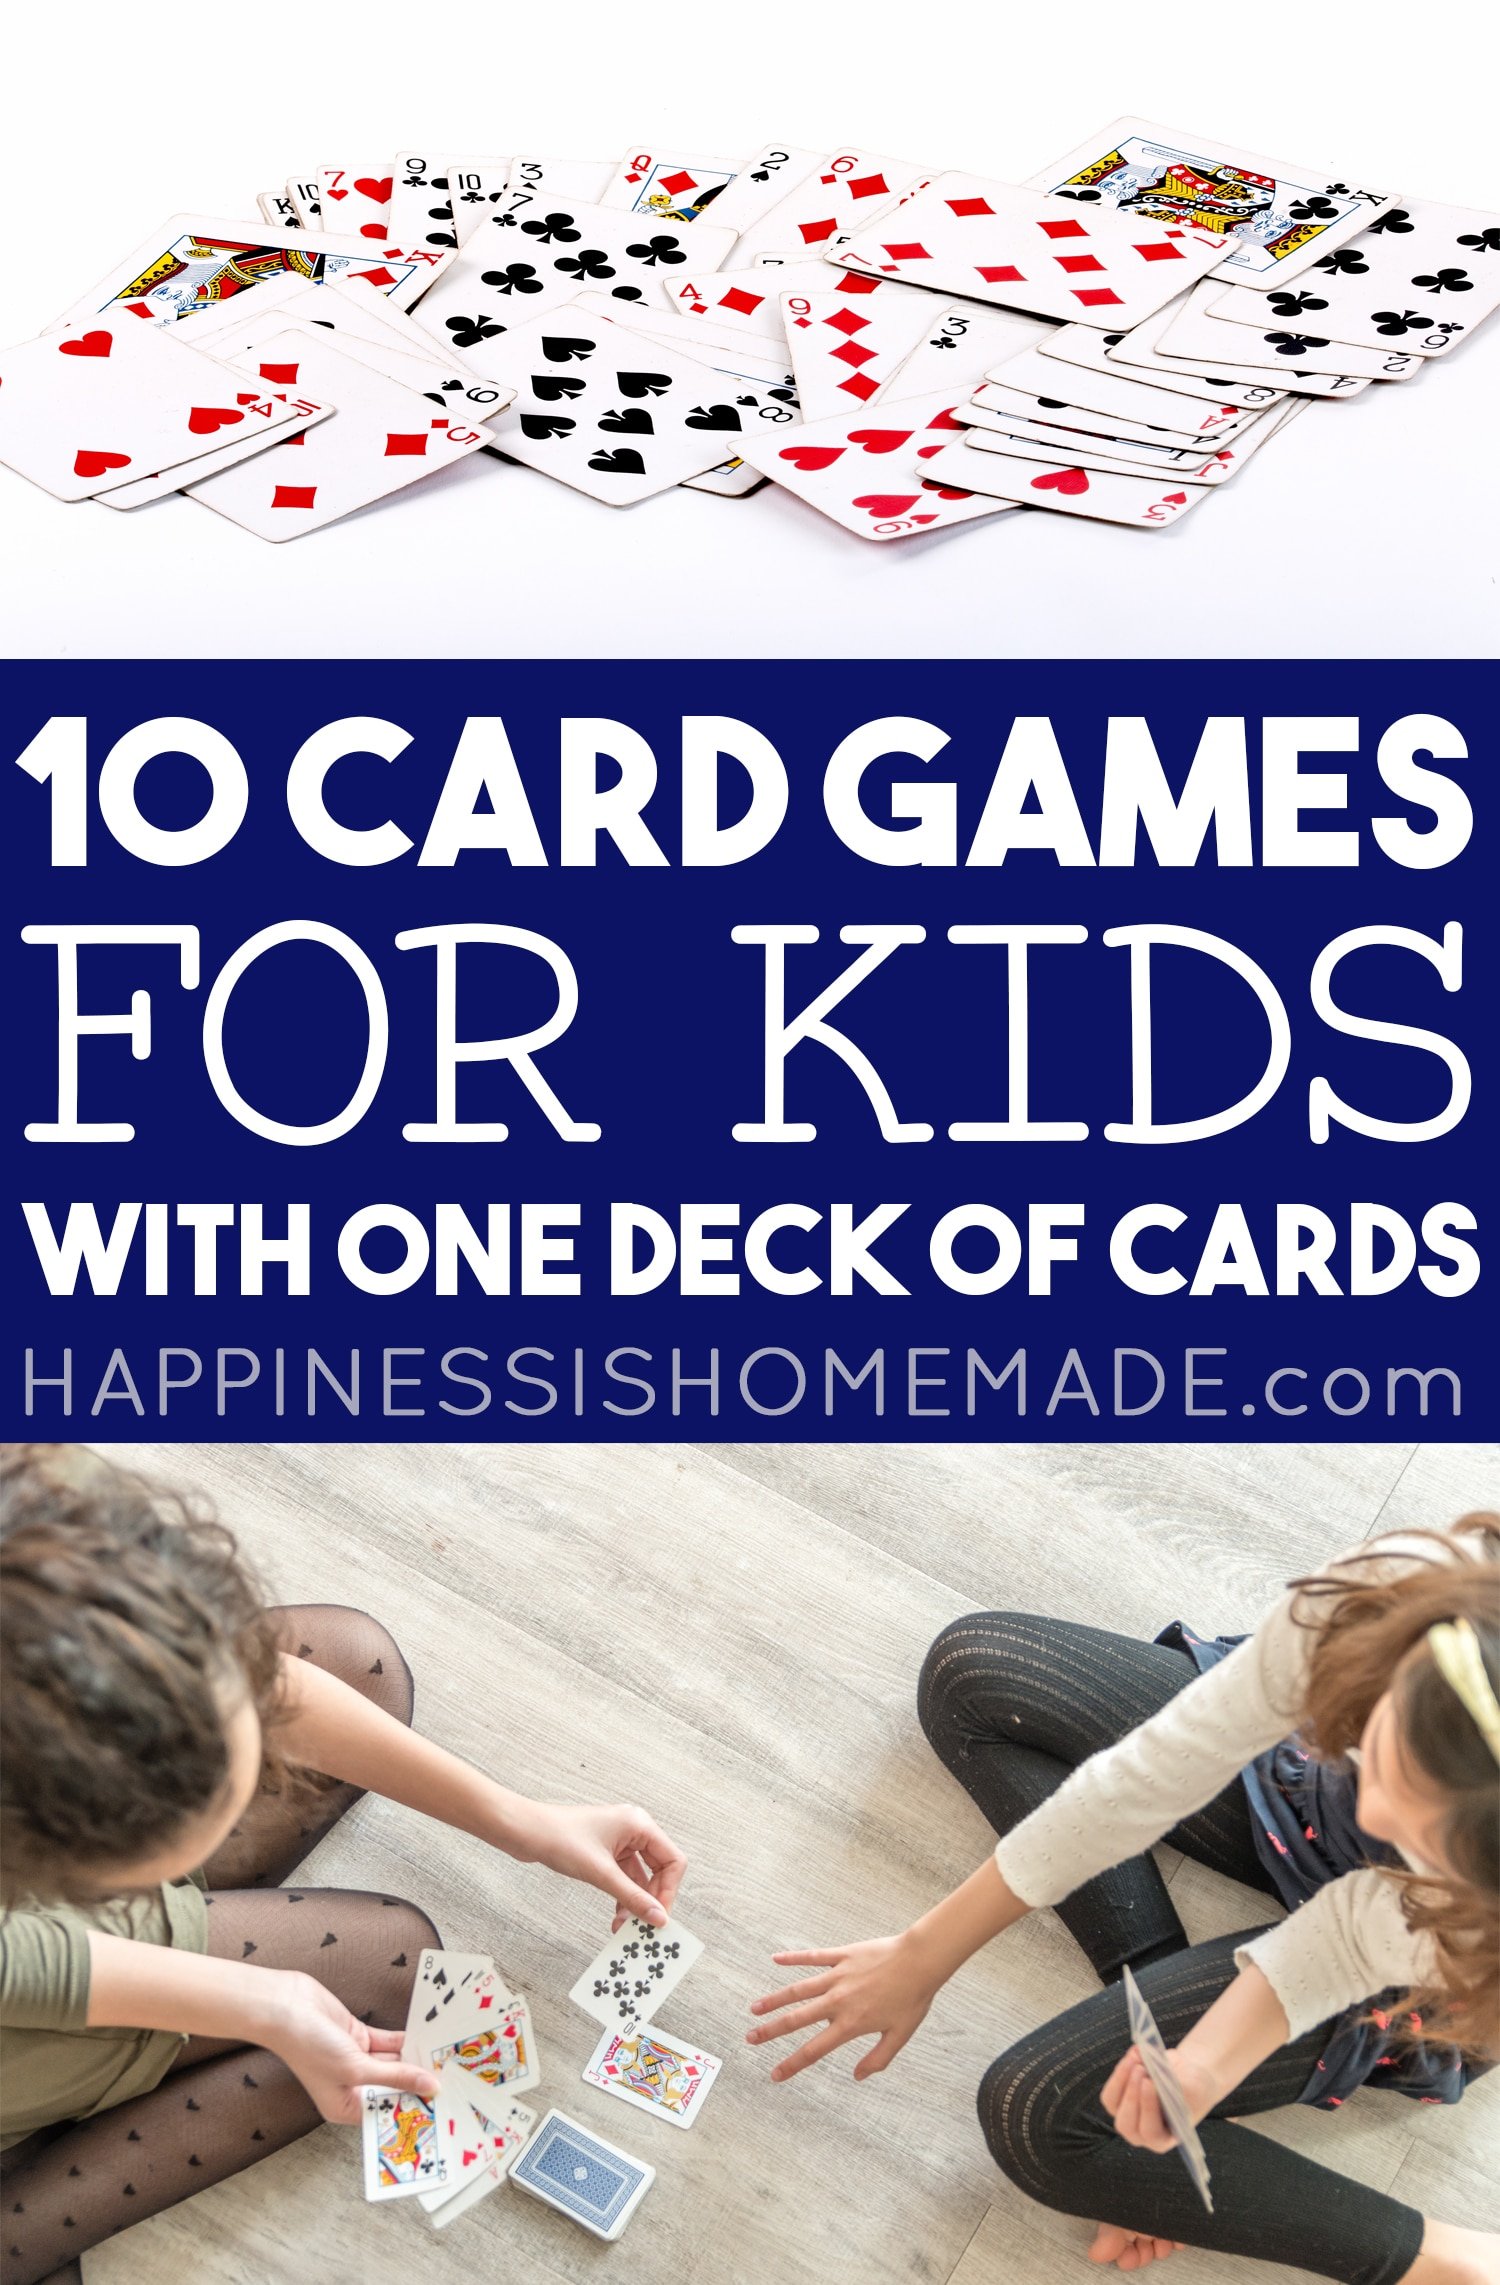 10 card games for kids with one deck of cards